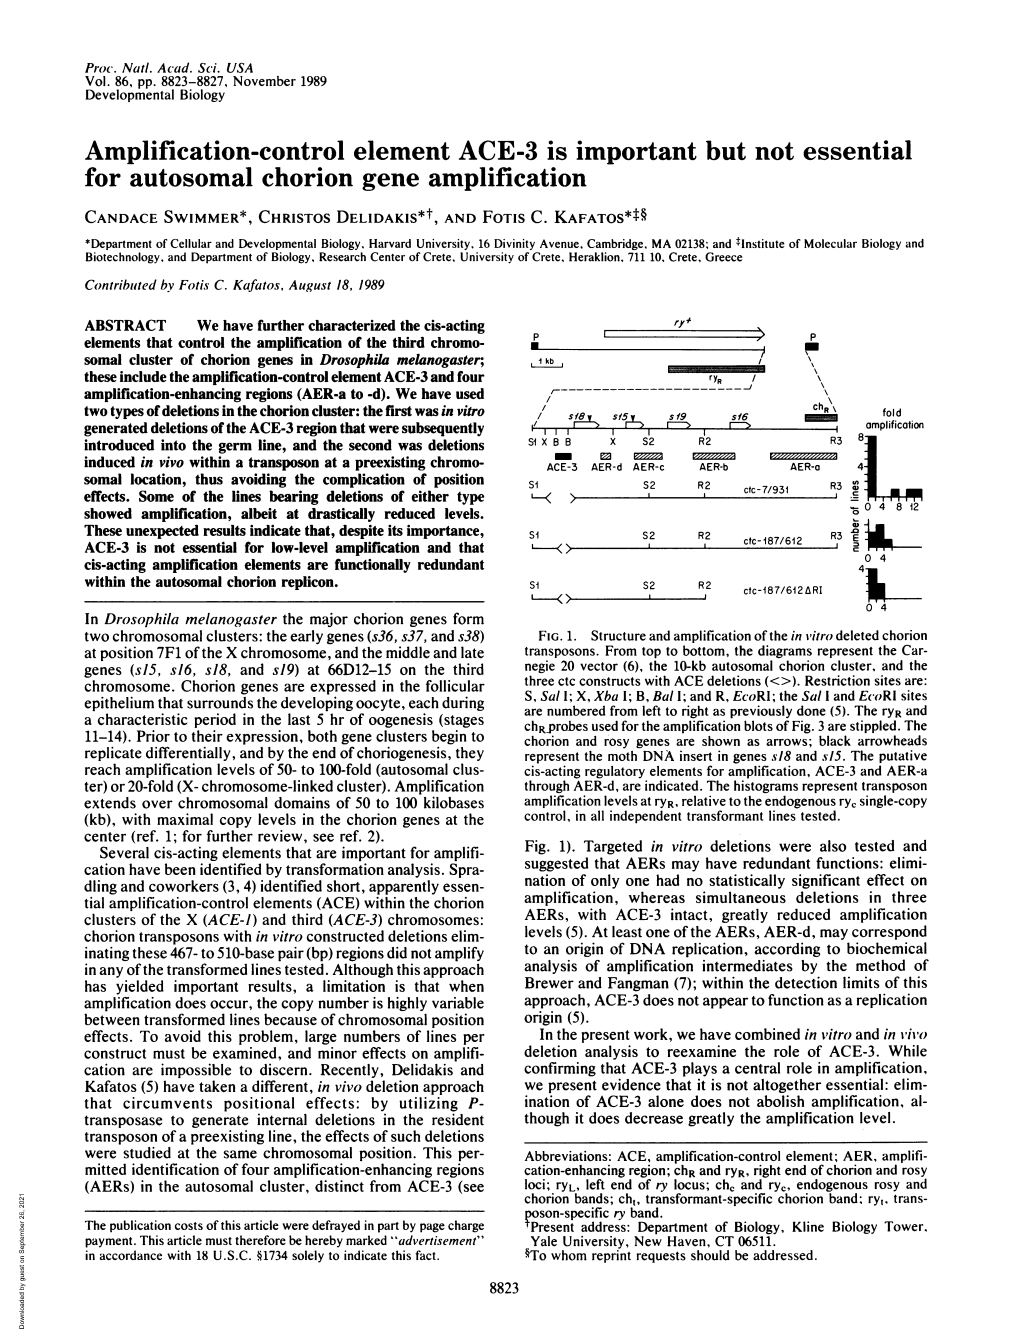 Amplification-Control Element ACE-3 Is Important but Not Essential for Autosomal Chorion Gene Amplification CANDACE SWIMMER*, Christos DELIDAKIS*T, and FOTIS C